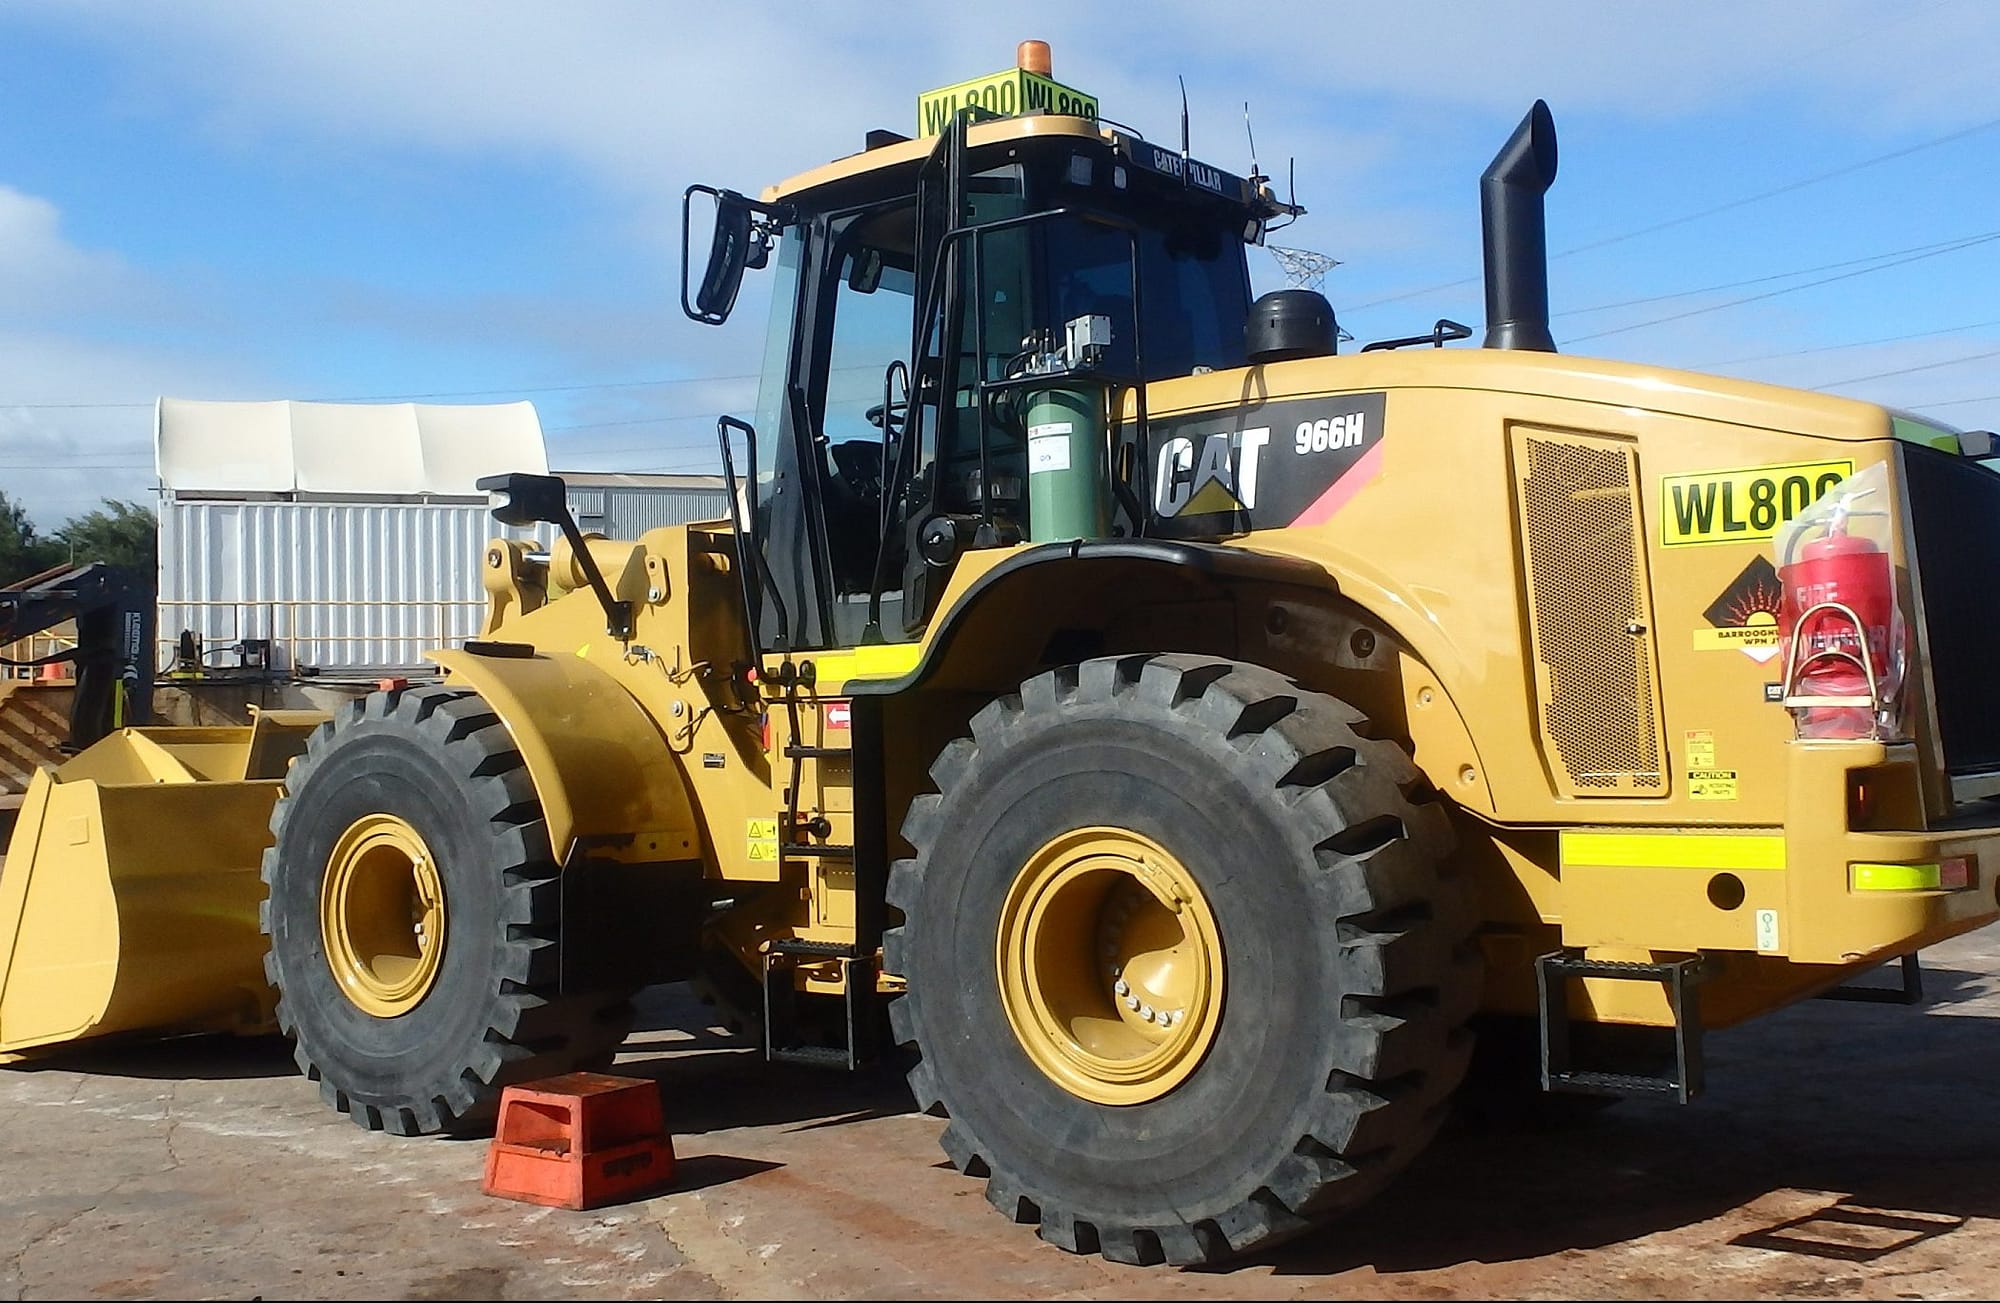 Caterpillar 966H Wheel Loader - For Hire